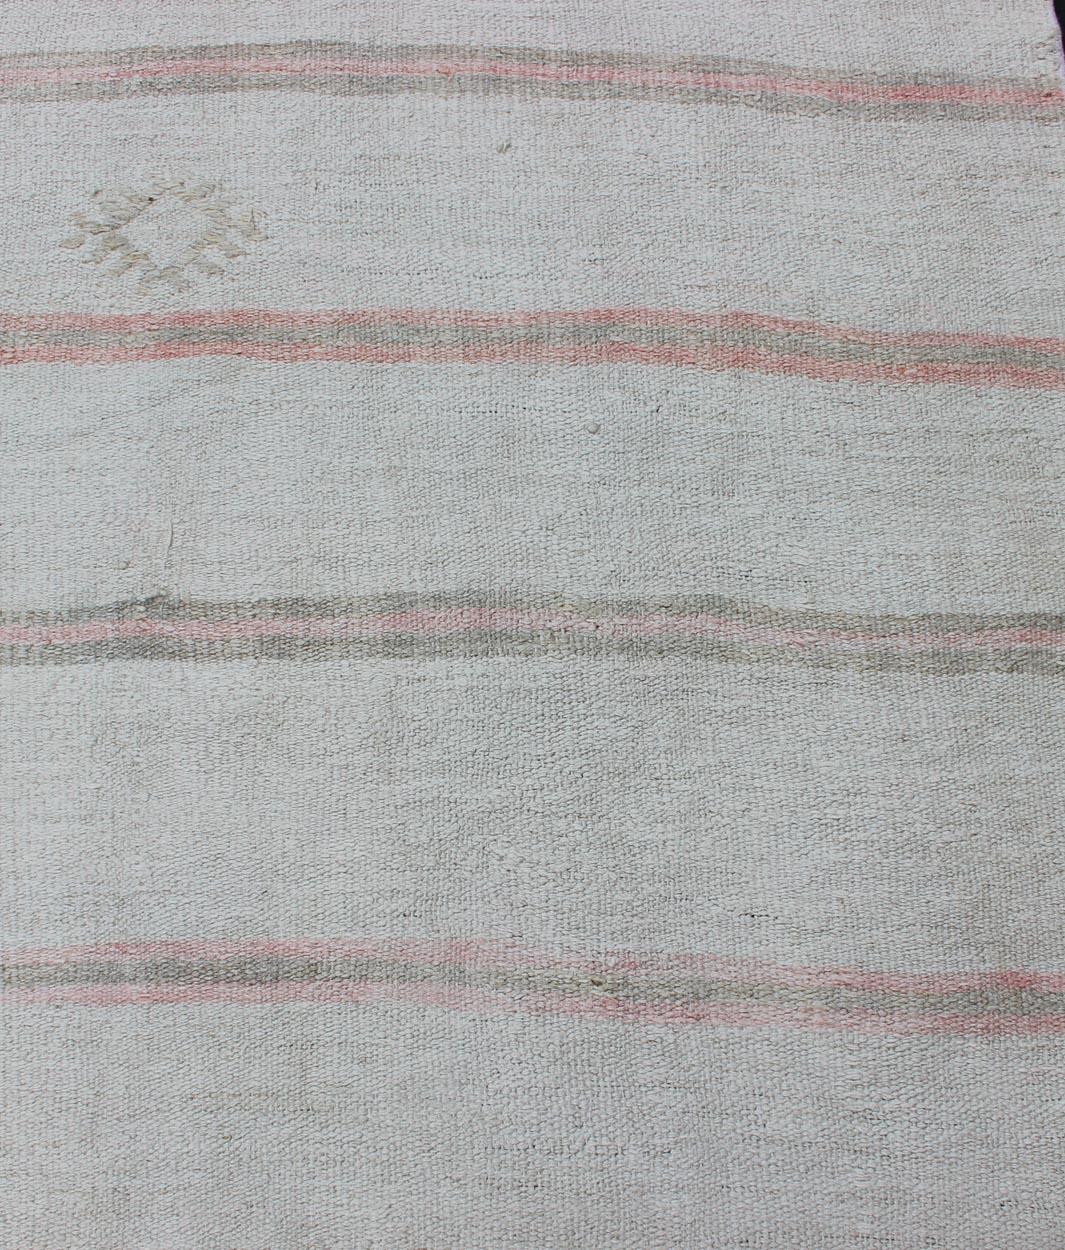 Vintage Turkish Kilim Runner with Stripes in Light Coral and Neutral Tones For Sale 1